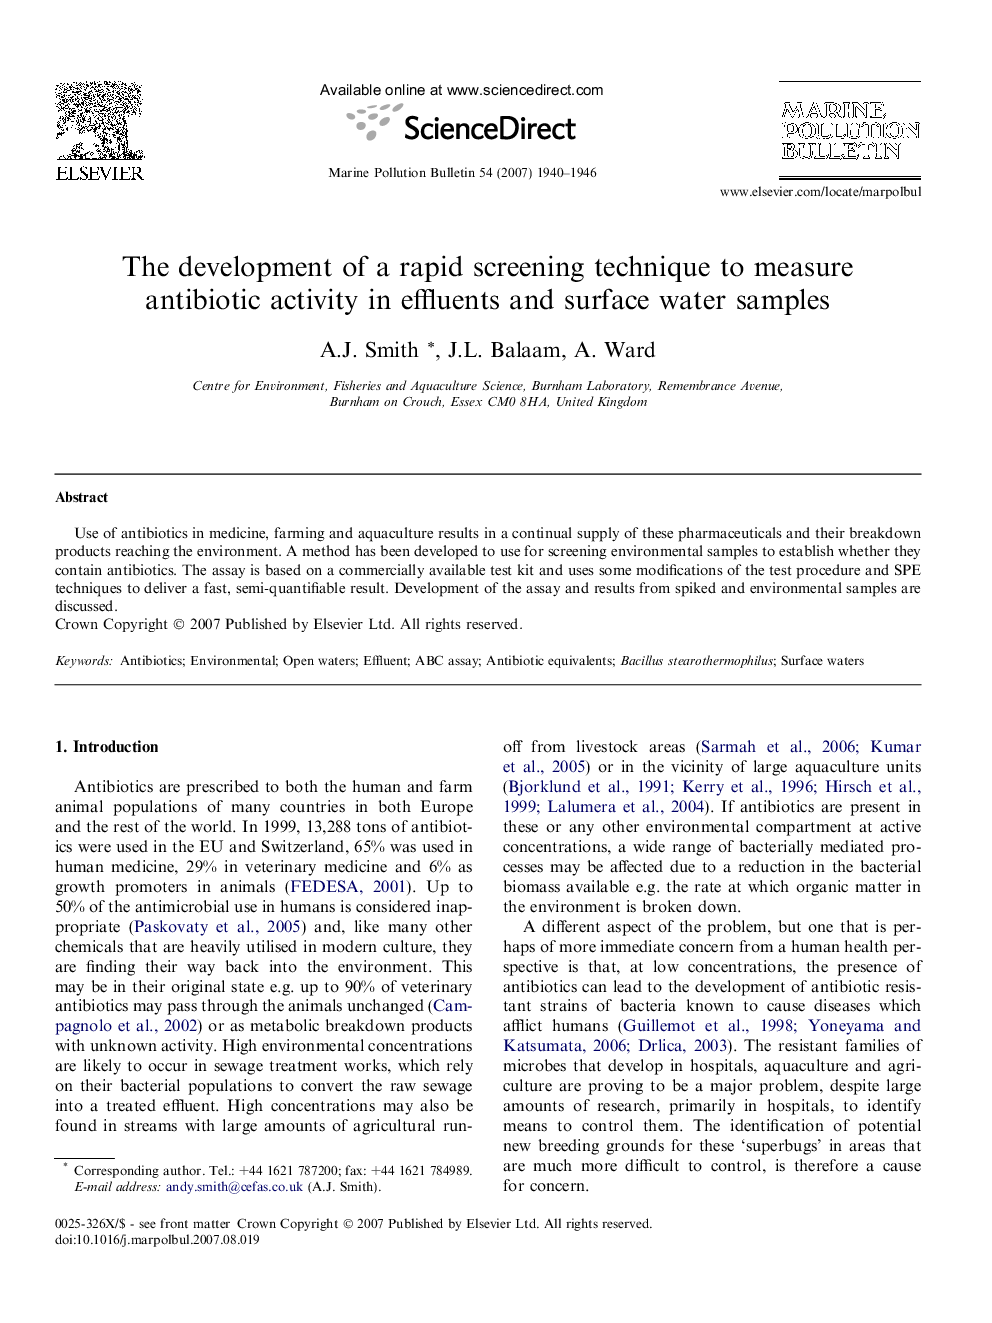 The development of a rapid screening technique to measure antibiotic activity in effluents and surface water samples